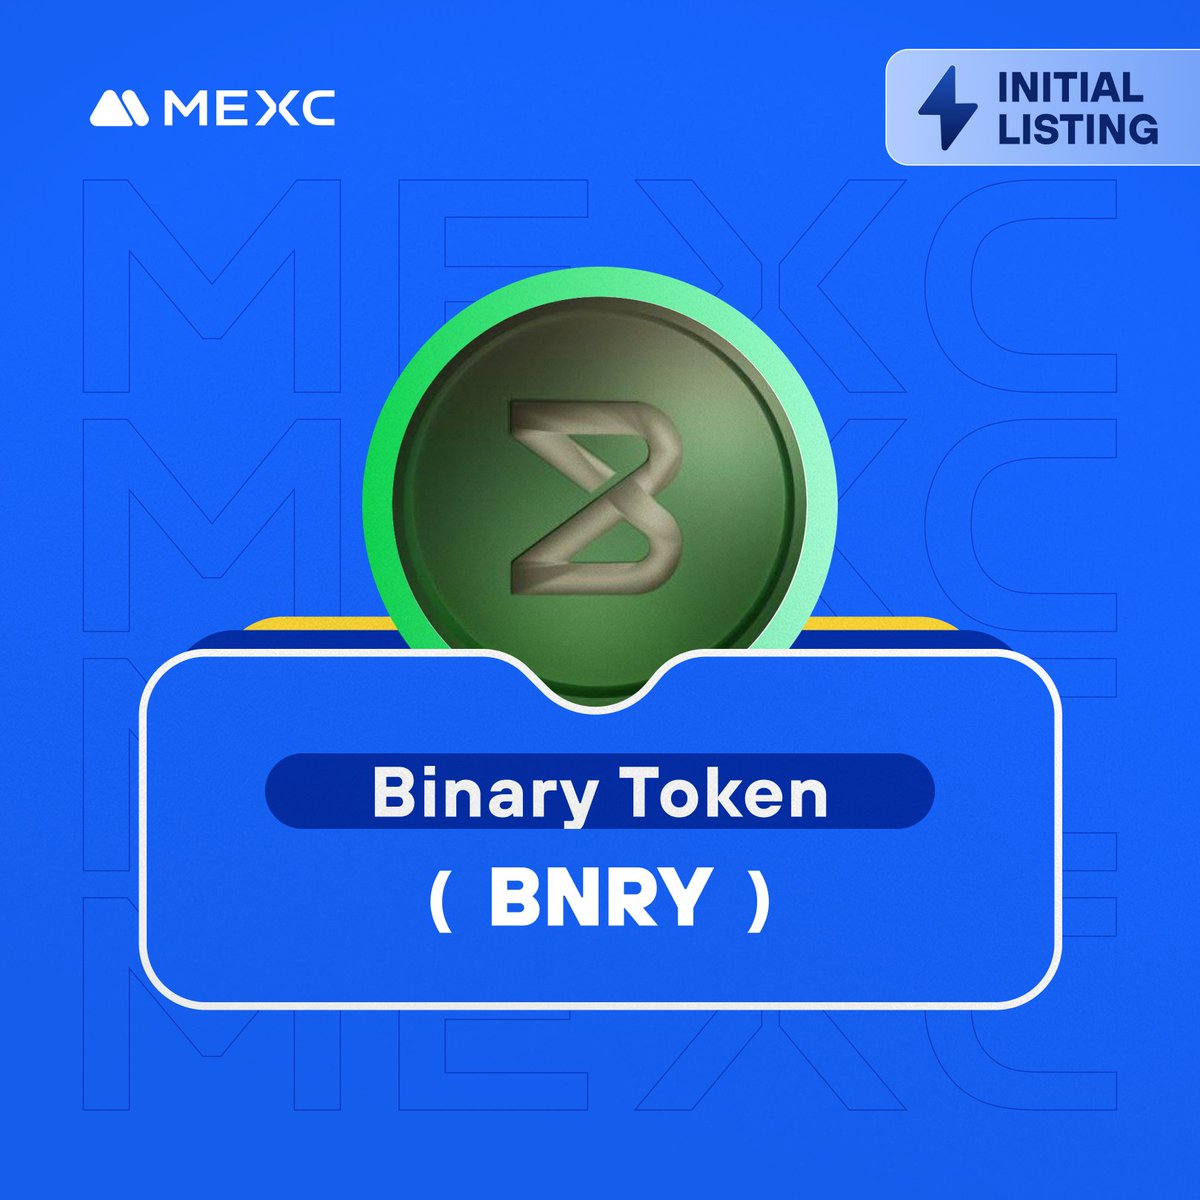 We're thrilled to announce that the @thebinaryhldgs Kickstarter has concluded and $BNRY will be listed on #MEXC! 🔹Deposit: Opened 🔹BNRY/USDT Trading in the Innovation Zone: 2024-04-30 06:00 (UTC) Details: mexc.com/support/articl…